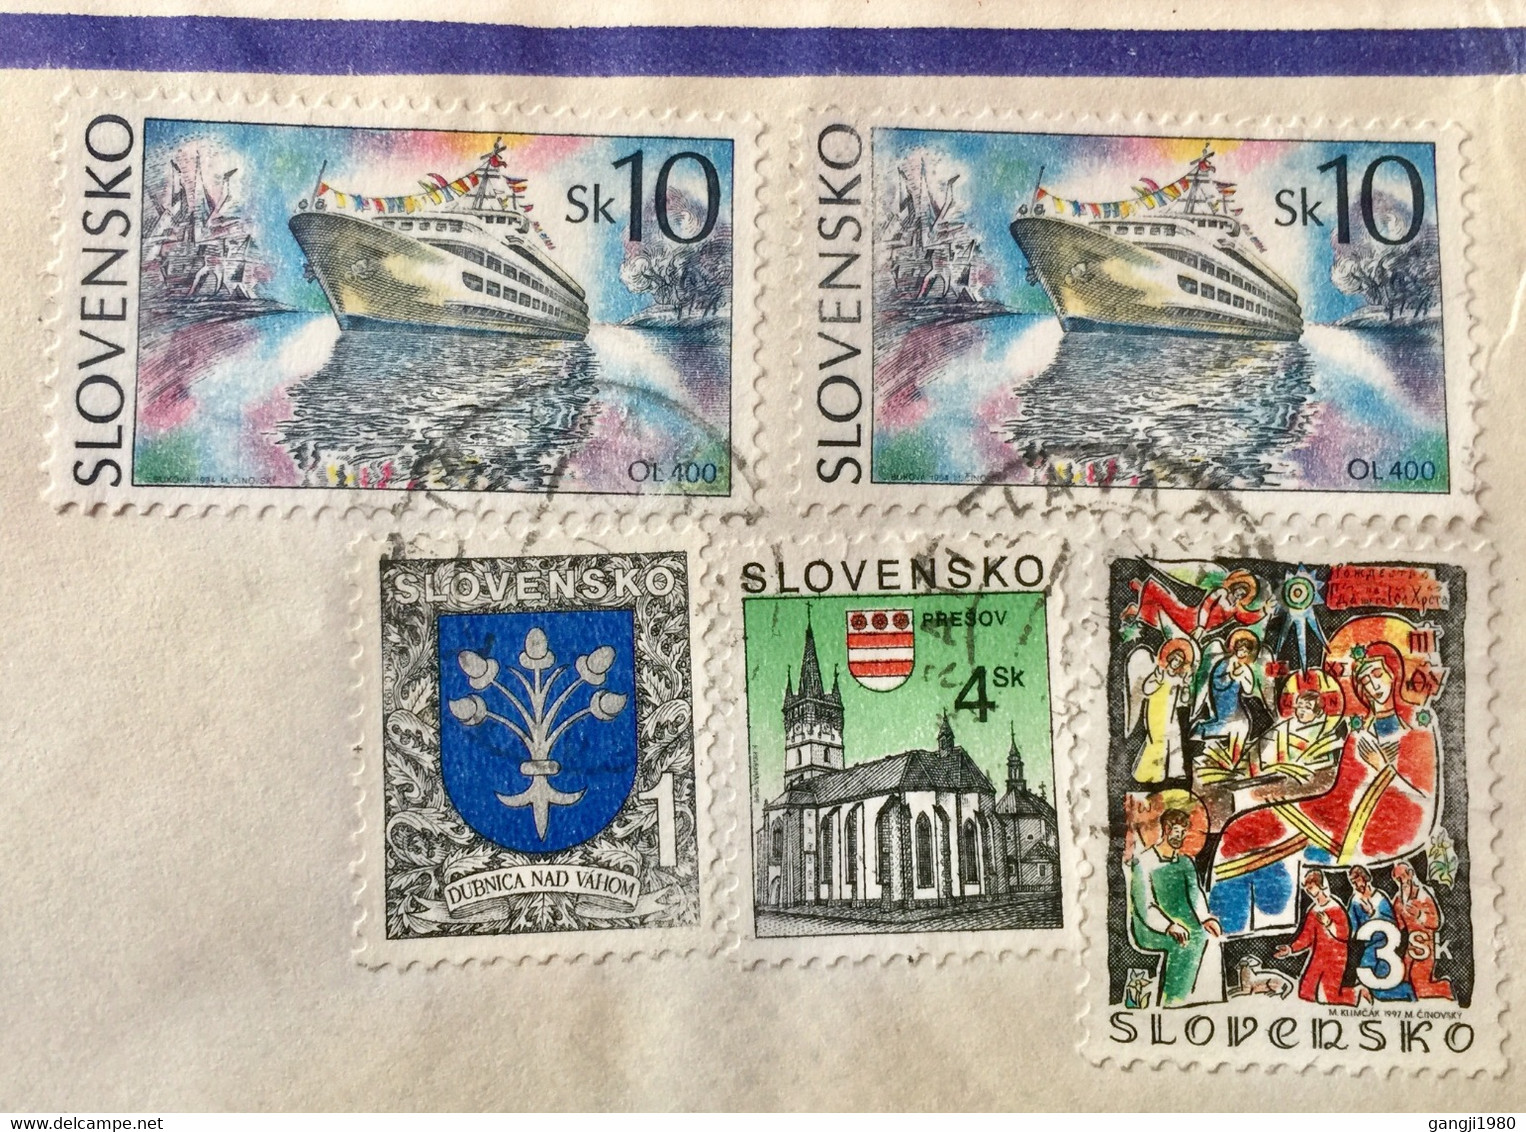 SLOVAKIA 2005, USED AIRMAIL COVER TO INDIA ,5 STAMPS 38SK RATE !SHIP, PRESOV,BUILDING,CHURCH,FAIRYTALES,ART ,PAINTING - Cartas & Documentos